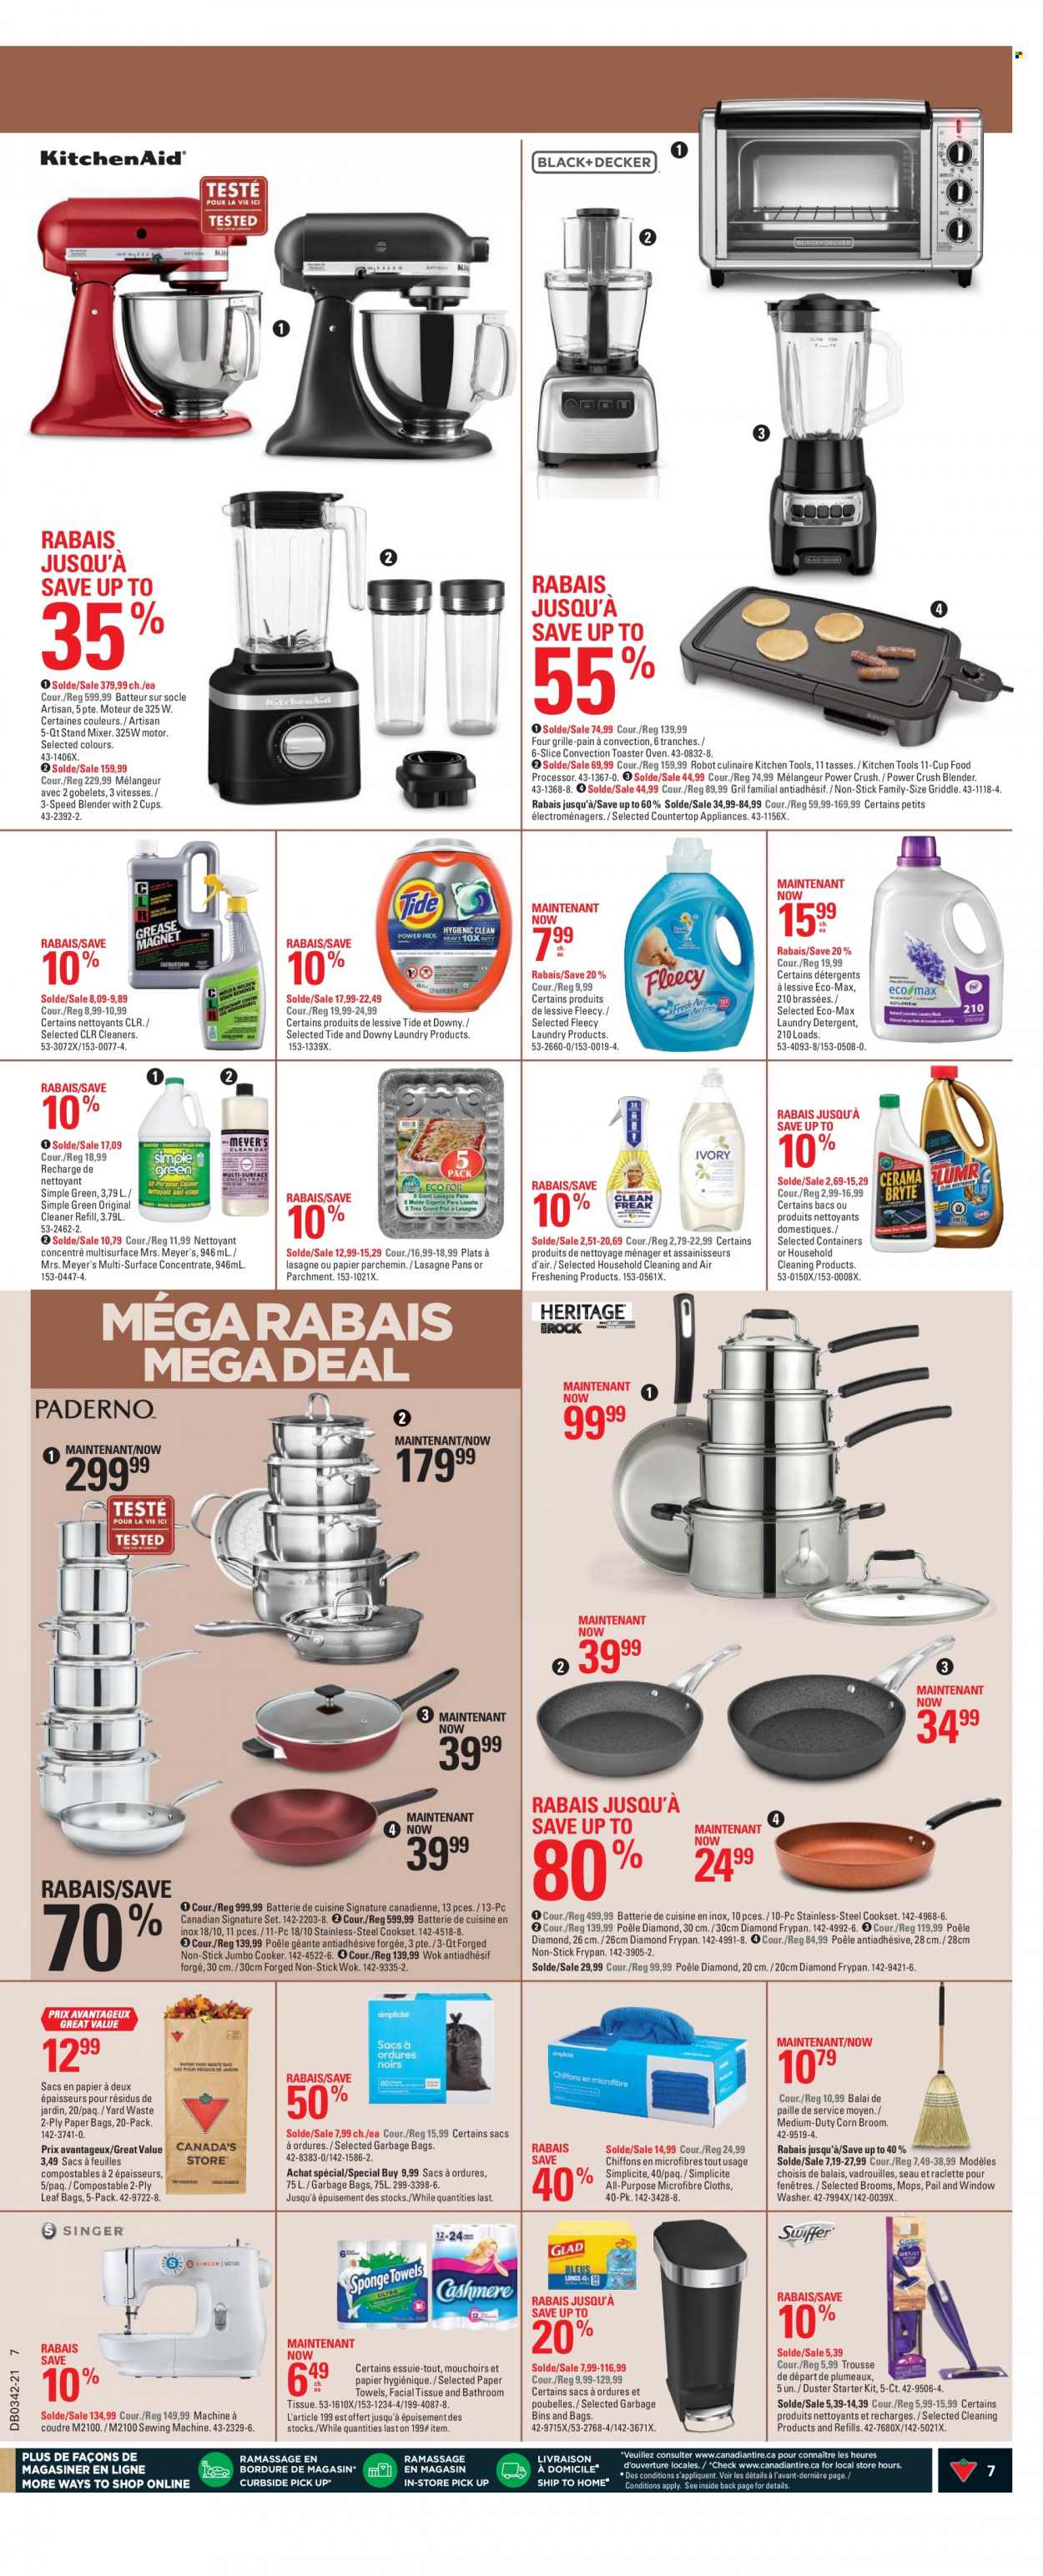 thumbnail - Canadian Tire Flyer - October 14, 2021 - October 20, 2021 - Sales products - bath tissue, cleaner, Tide, laundry detergent, Downy Laundry, bag, duster, broom, wok, frying pan, kitchen tools, paper, towel, washing machine, mixer, stand mixer, food processor, sewing machine, blender, detergent, robot. Page 7.